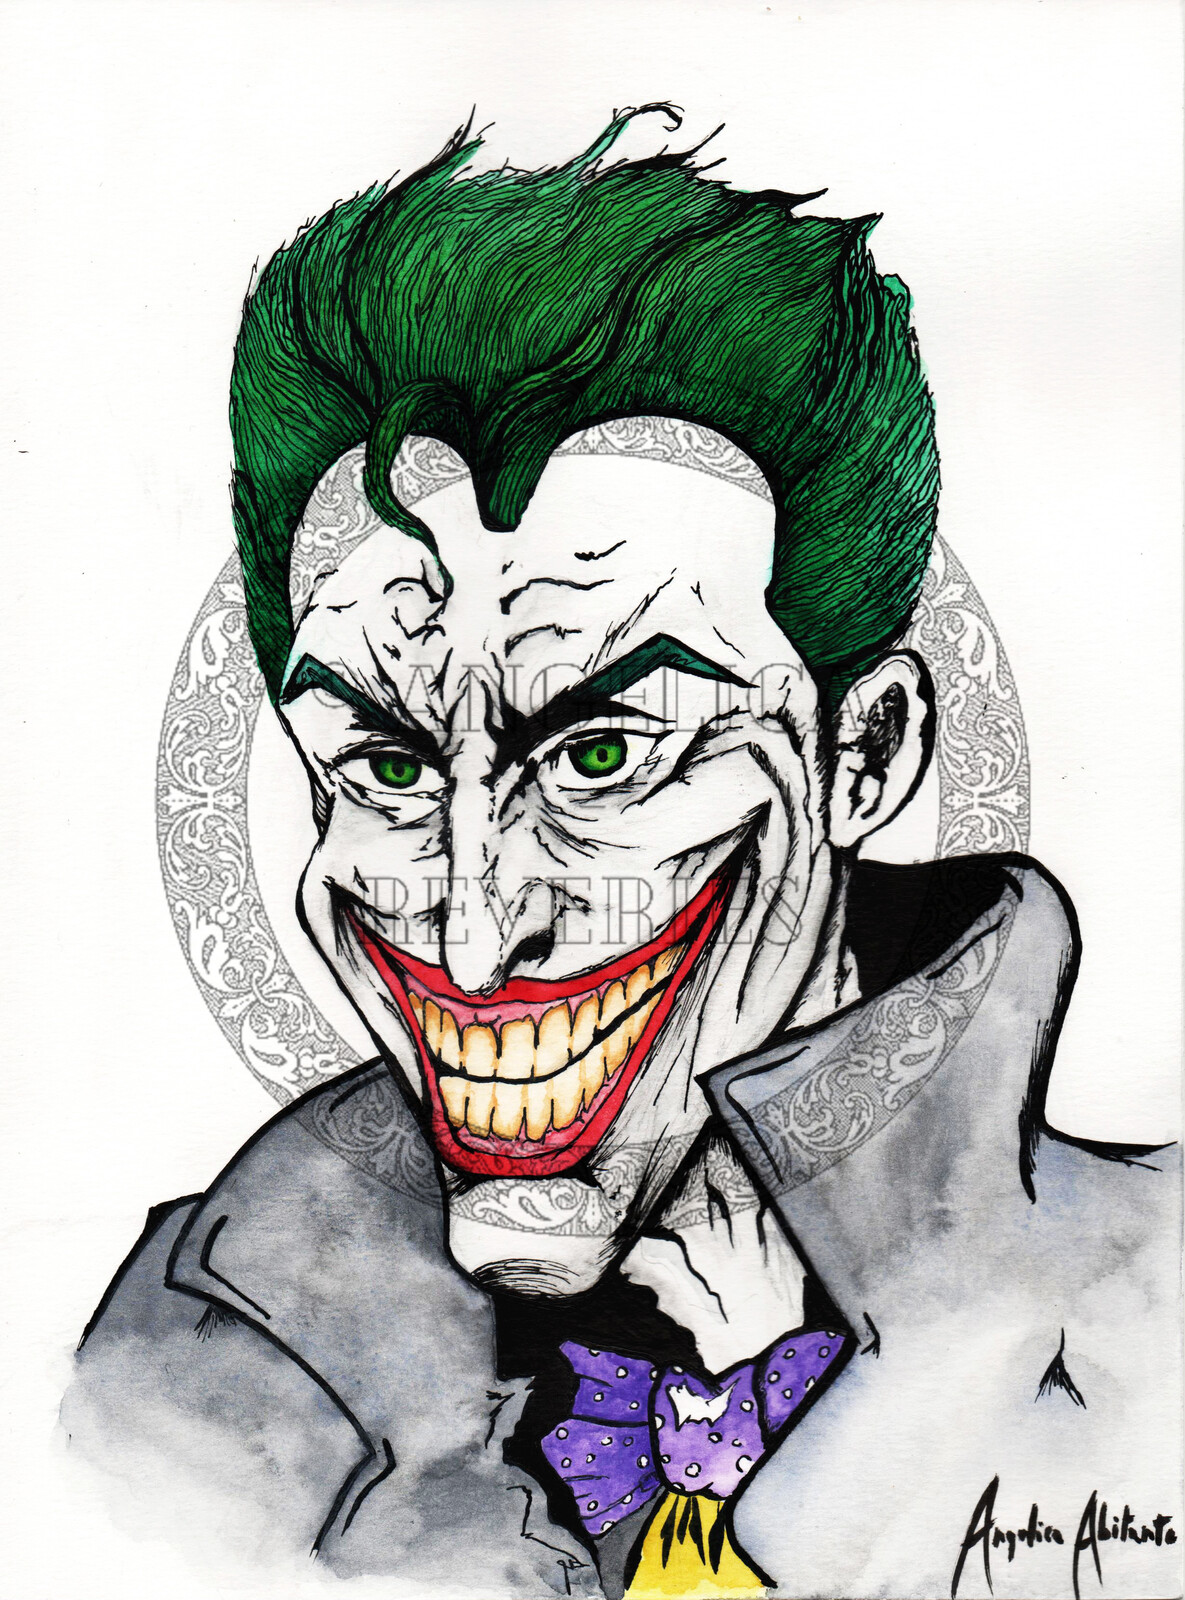 "Why so serious?"
Classic Joker design
Ink and watercolors on paper